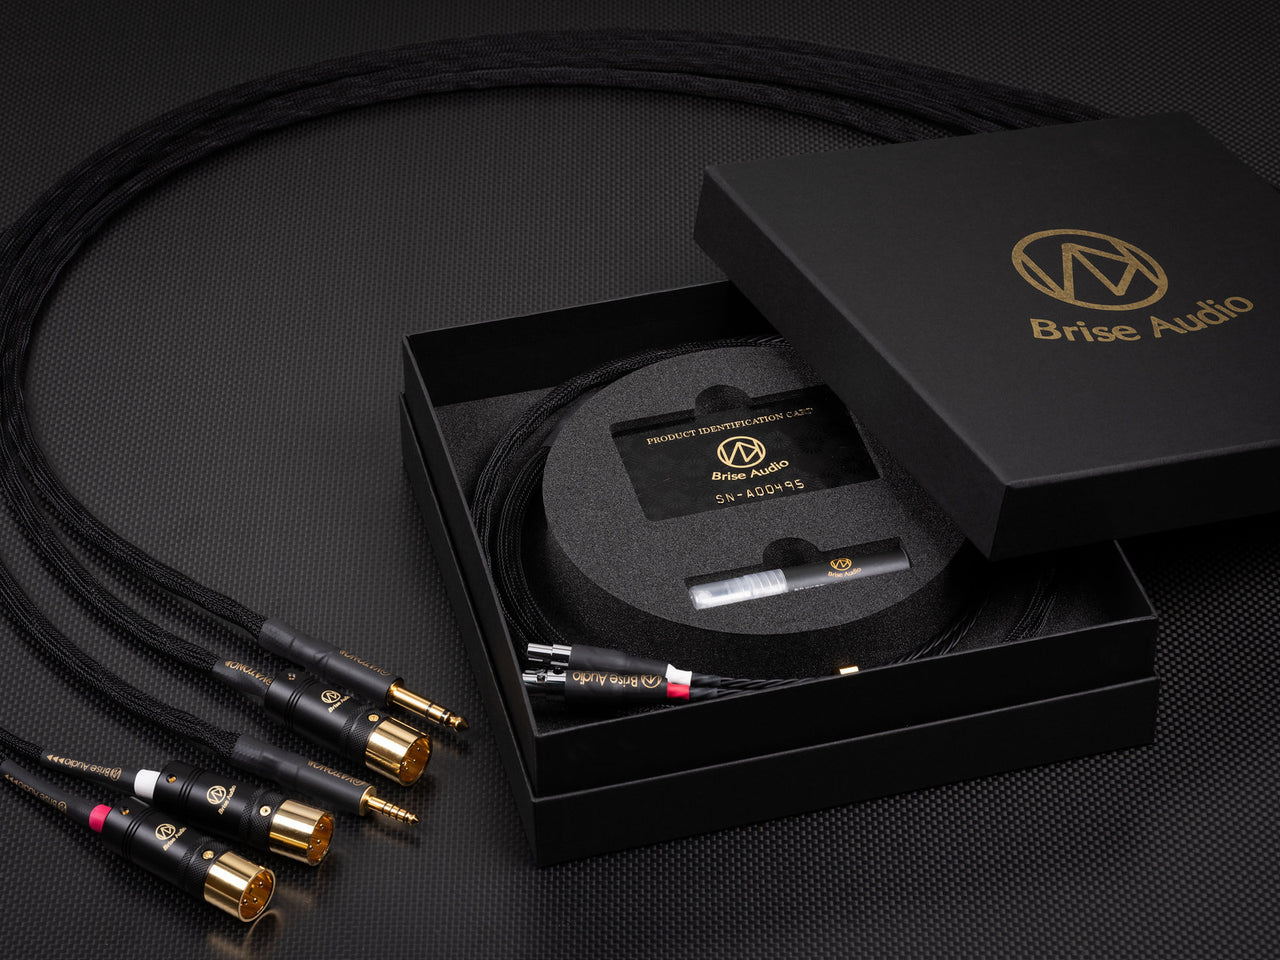 BriseAudio will release its new flagship headphone re-cable YATONO-HP Ultiumate on Friday, September 3, 2021.